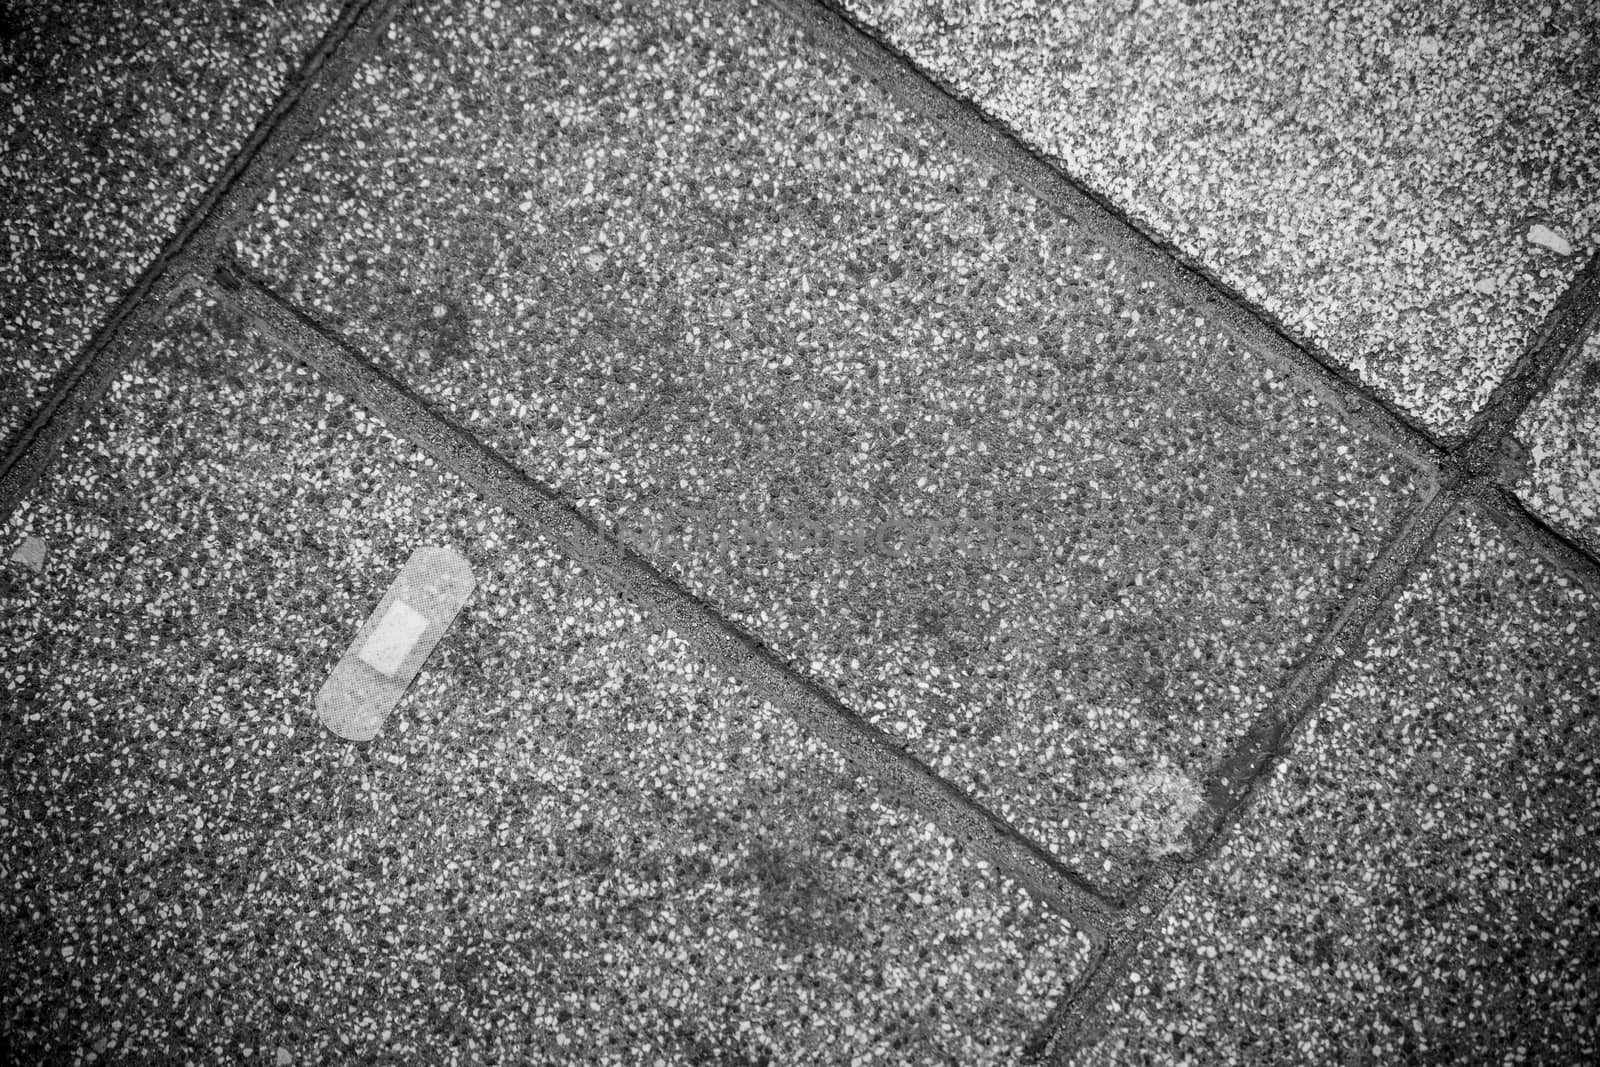 Band-Aid on Pavement by evdayan